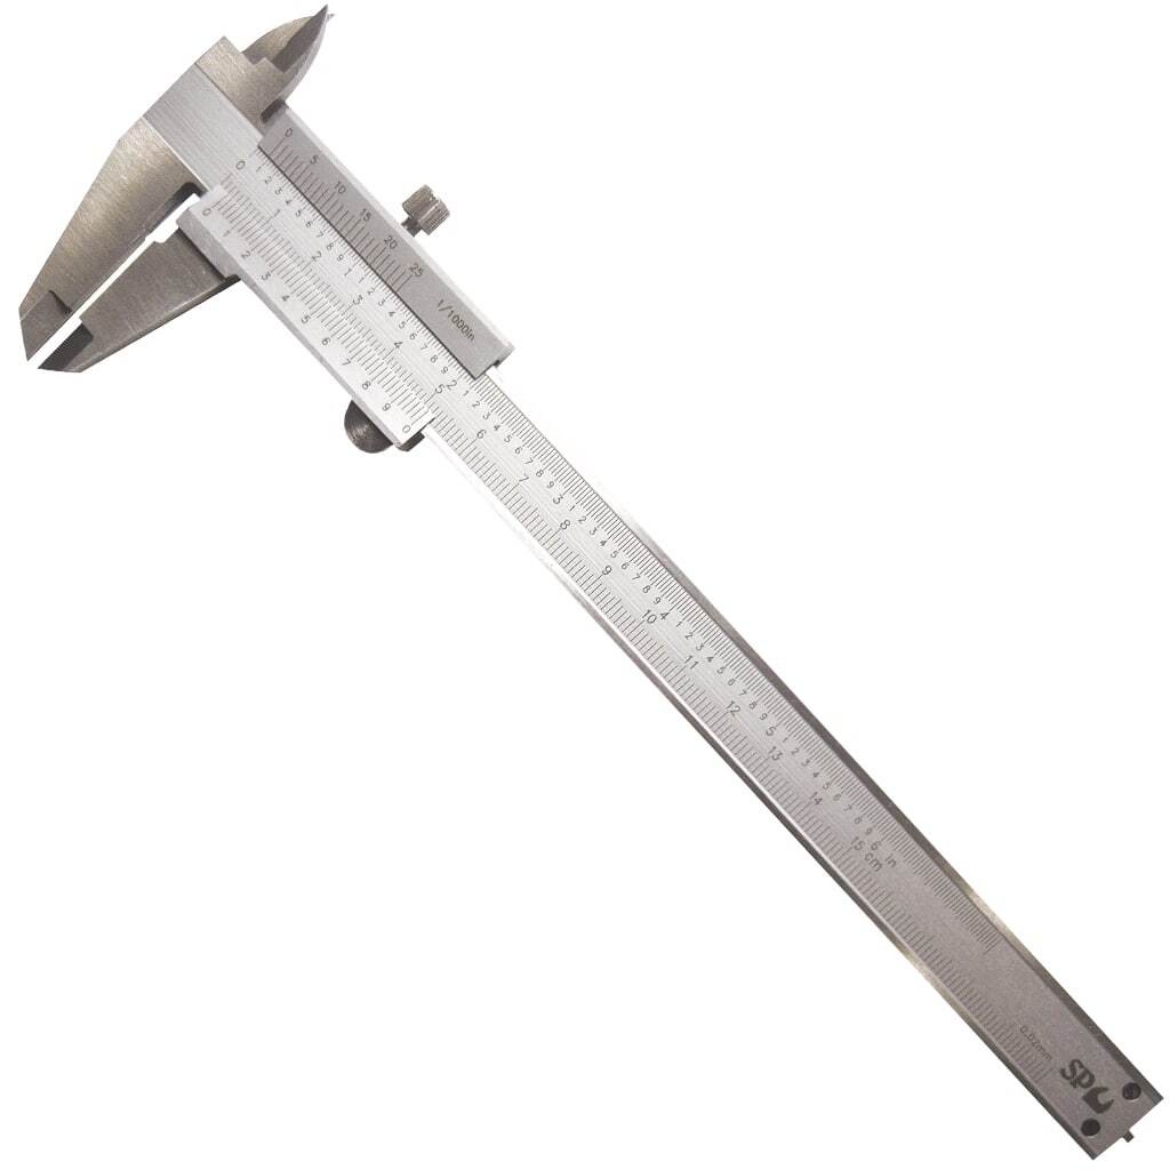 Picture of CALIPERS VERNIER 0-200MM/0-8"